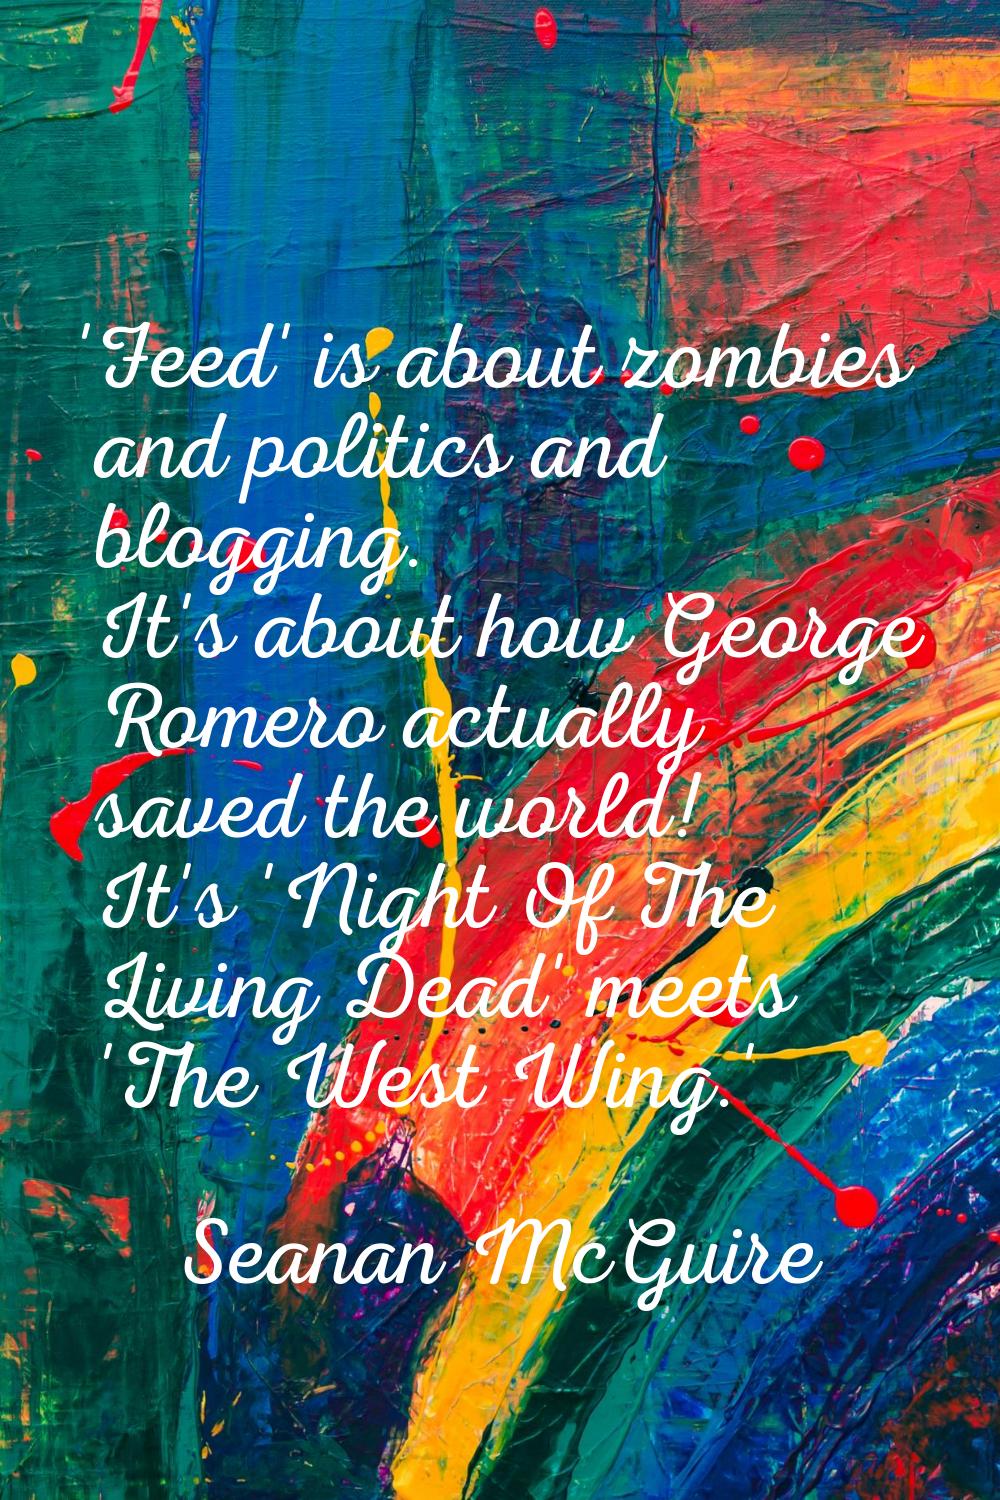 'Feed' is about zombies and politics and blogging. It's about how George Romero actually saved the 